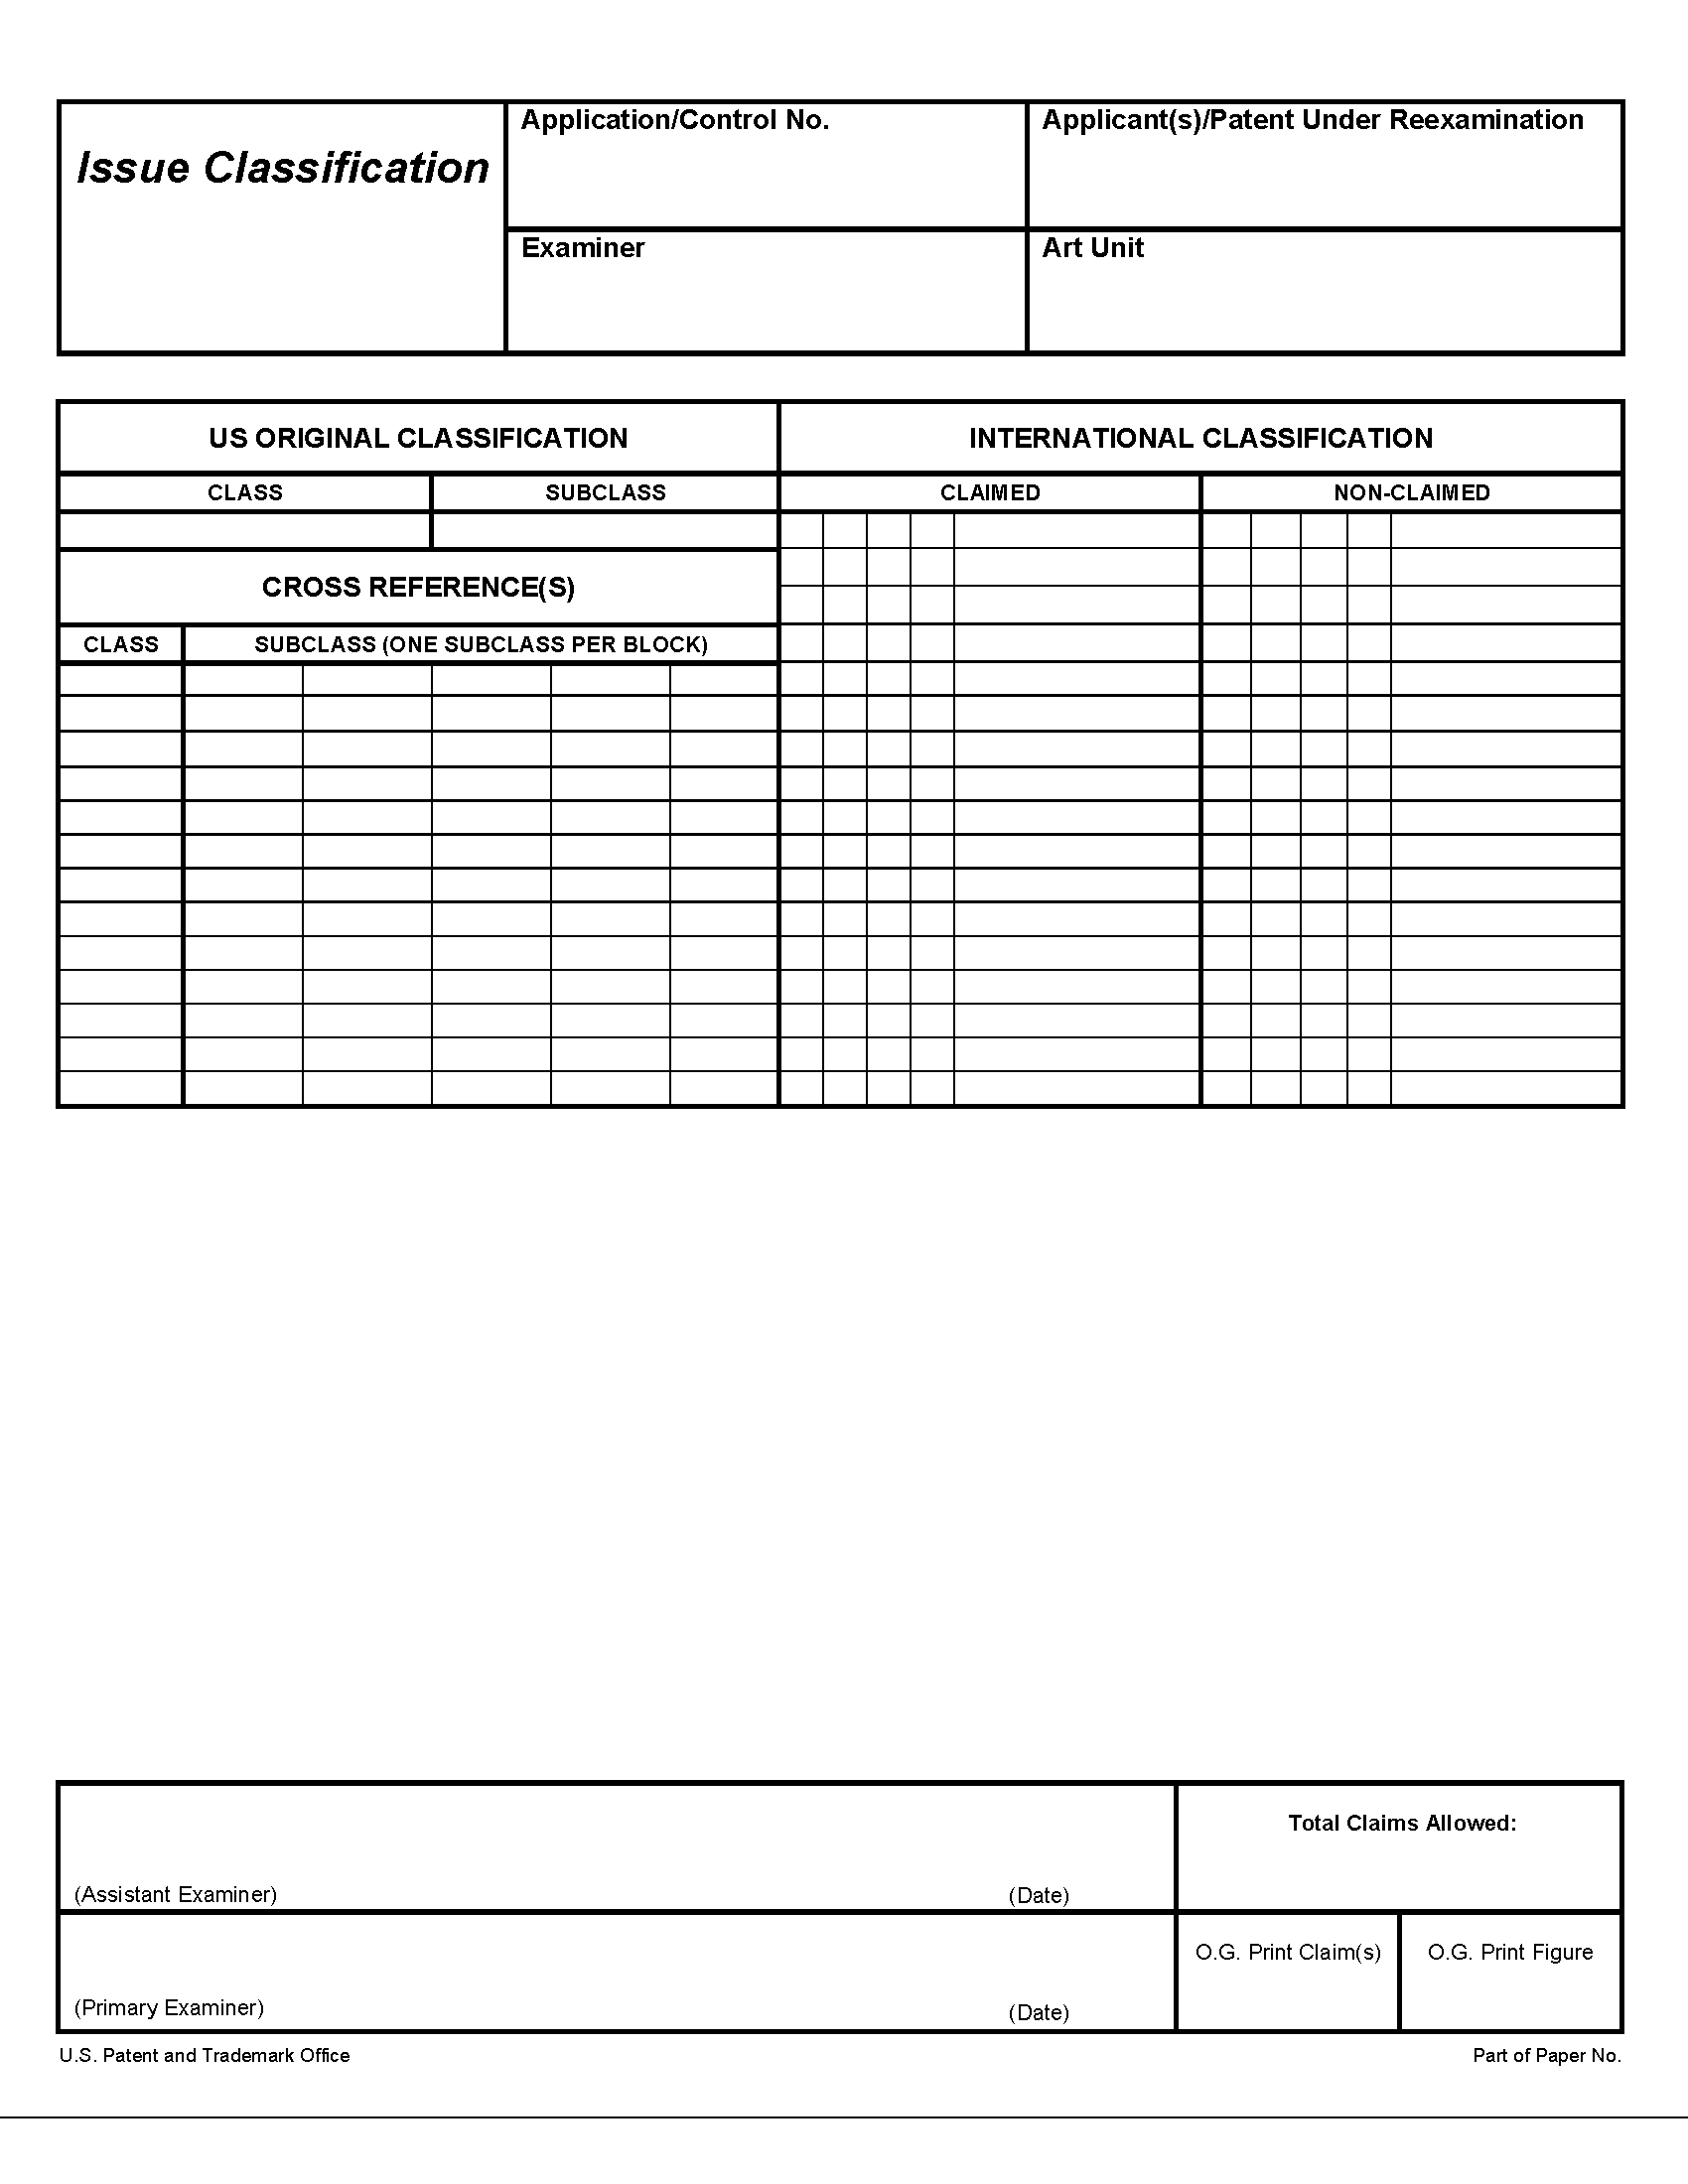 Issue Classication Sheet page 2